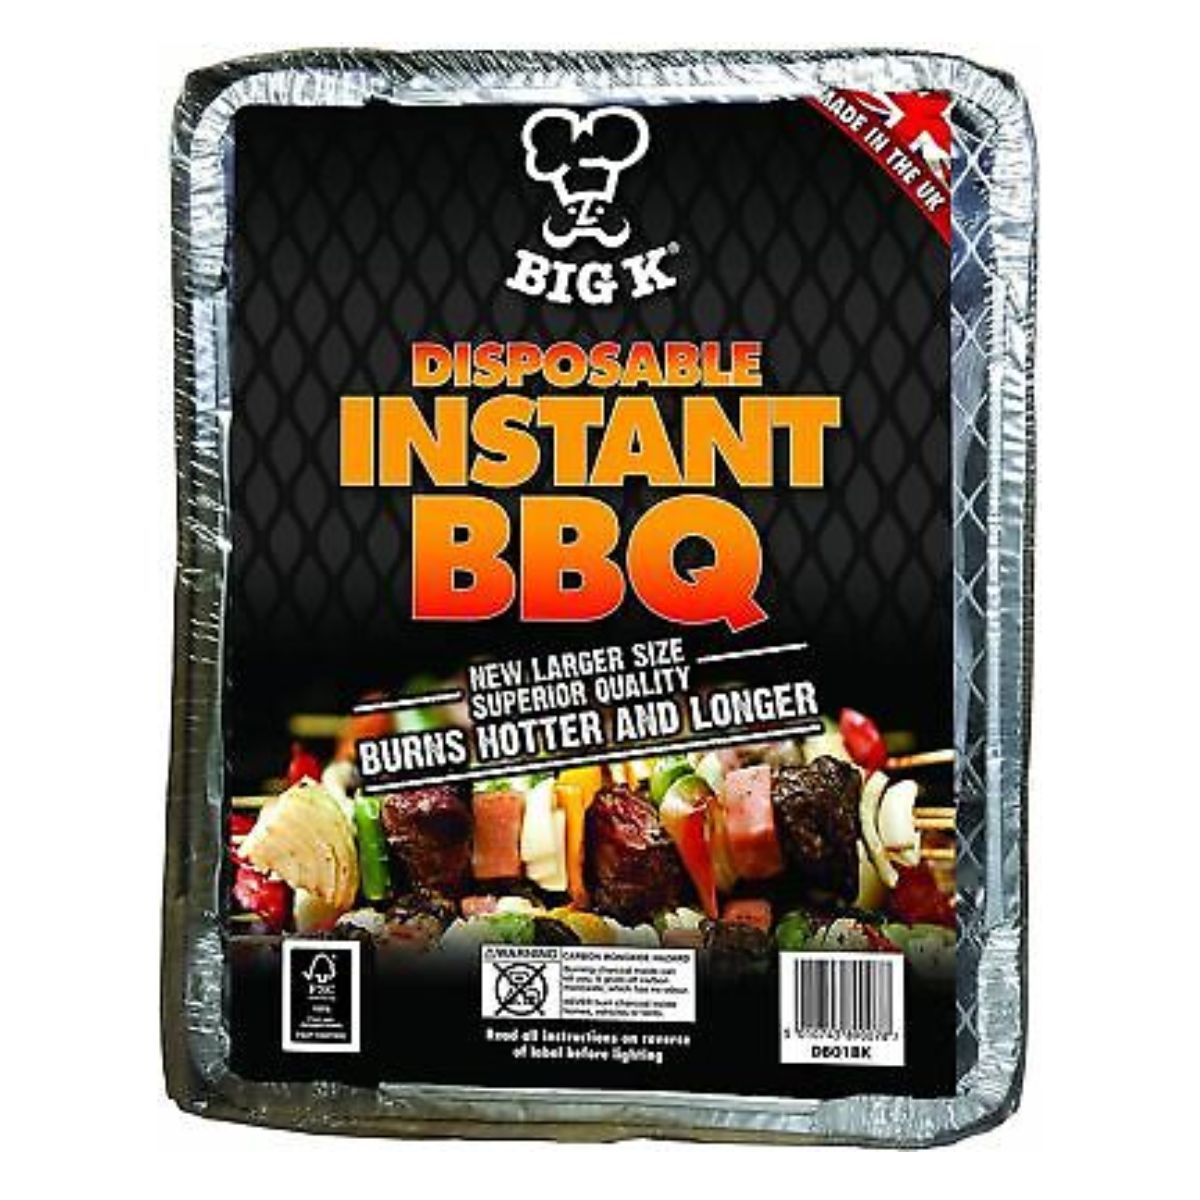 A package of Big K - All In One Picnic Size Disposable BBQ which is a single-use barbecue grill.